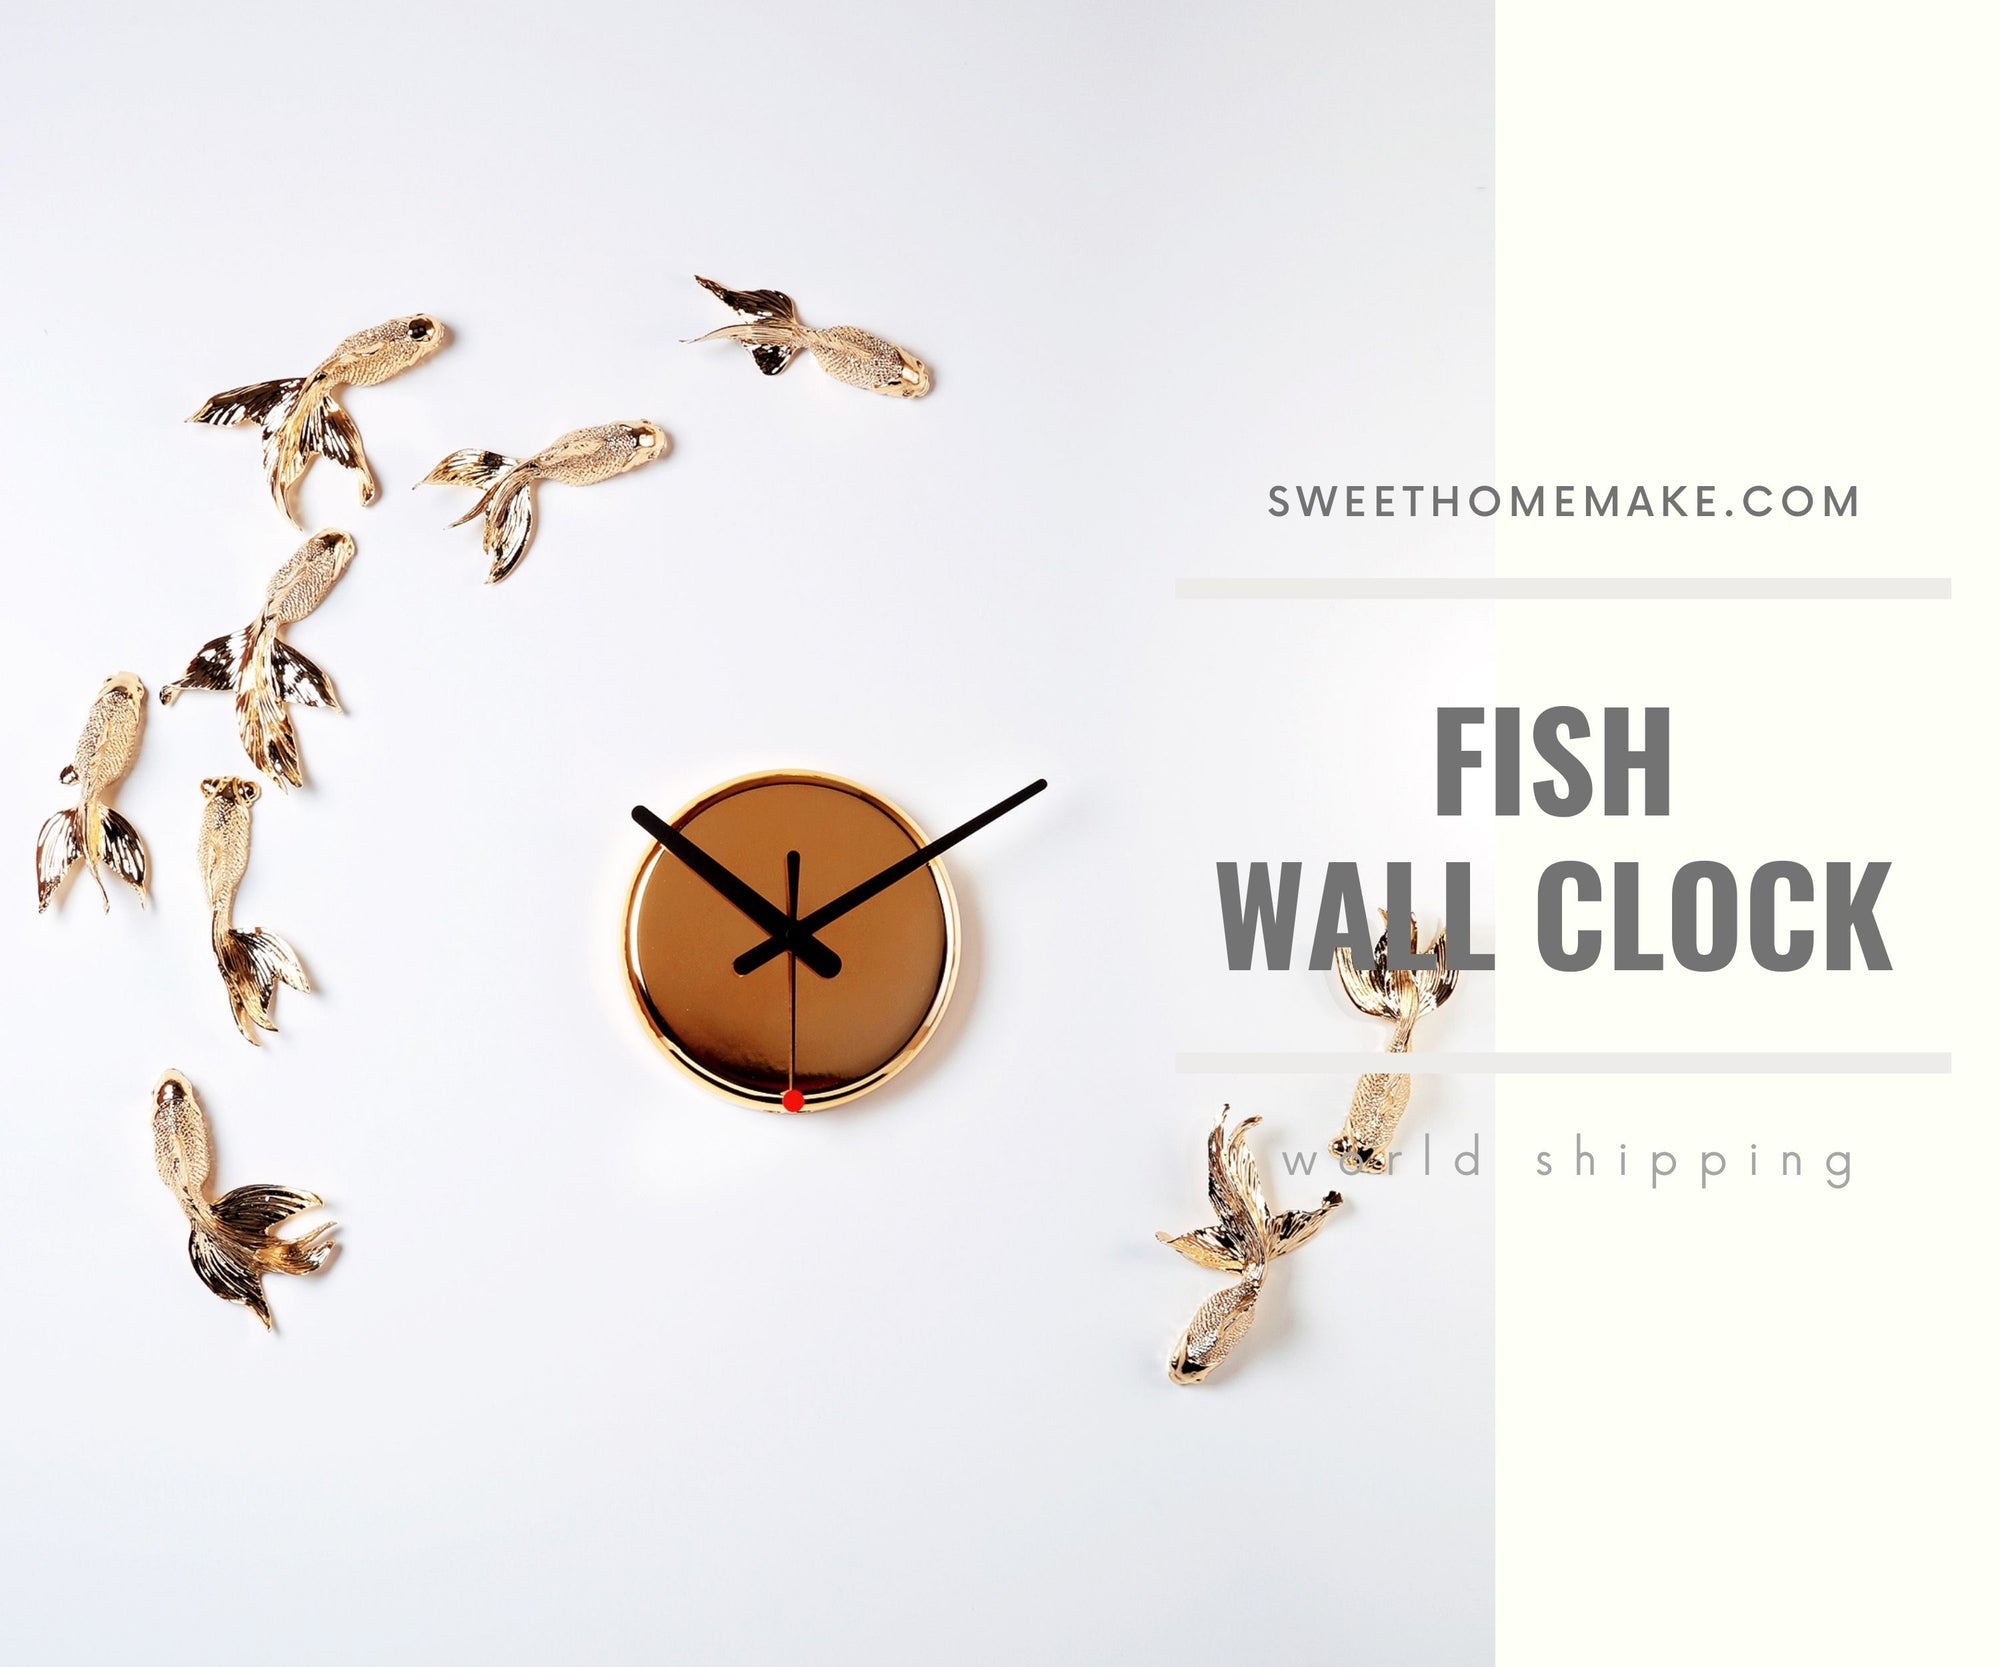 Fish Wall Clock and time remind us to be planned and stylish